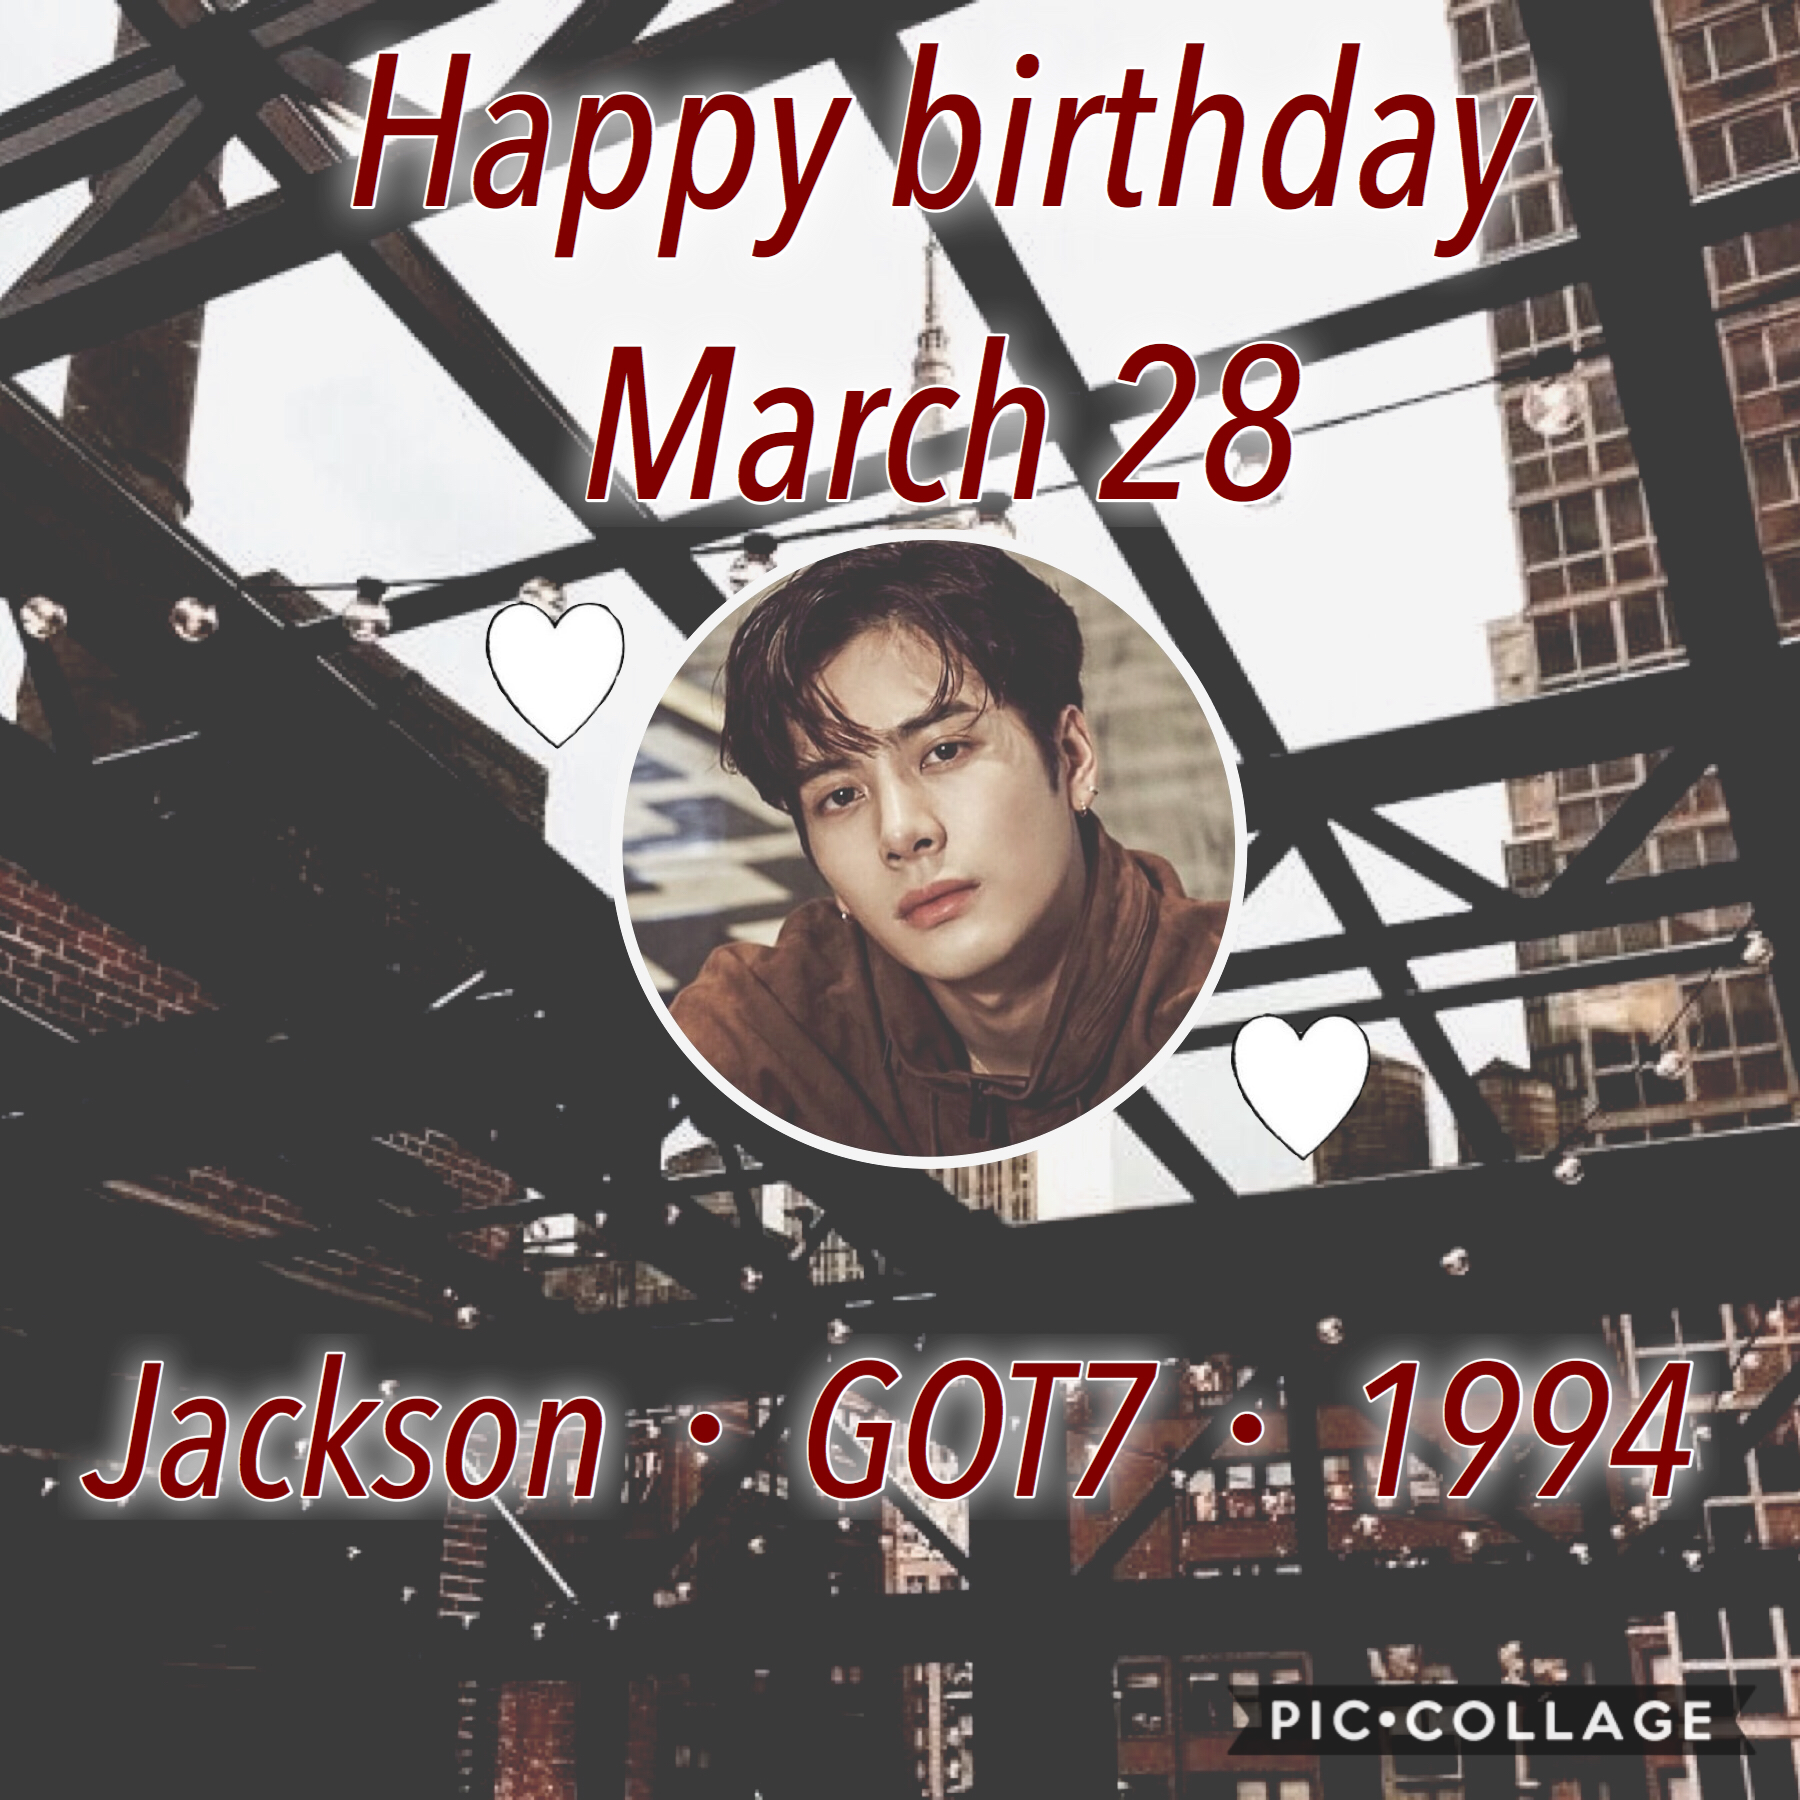 •🌷🌹•
Idk about you all, but I stan a man named Jackson Wang who happens to be a king🤷🏽‍♀️. Happy birthday💞.
Other birthdays:
•Hoya
🌹🌷~Whoop~🌷🌹